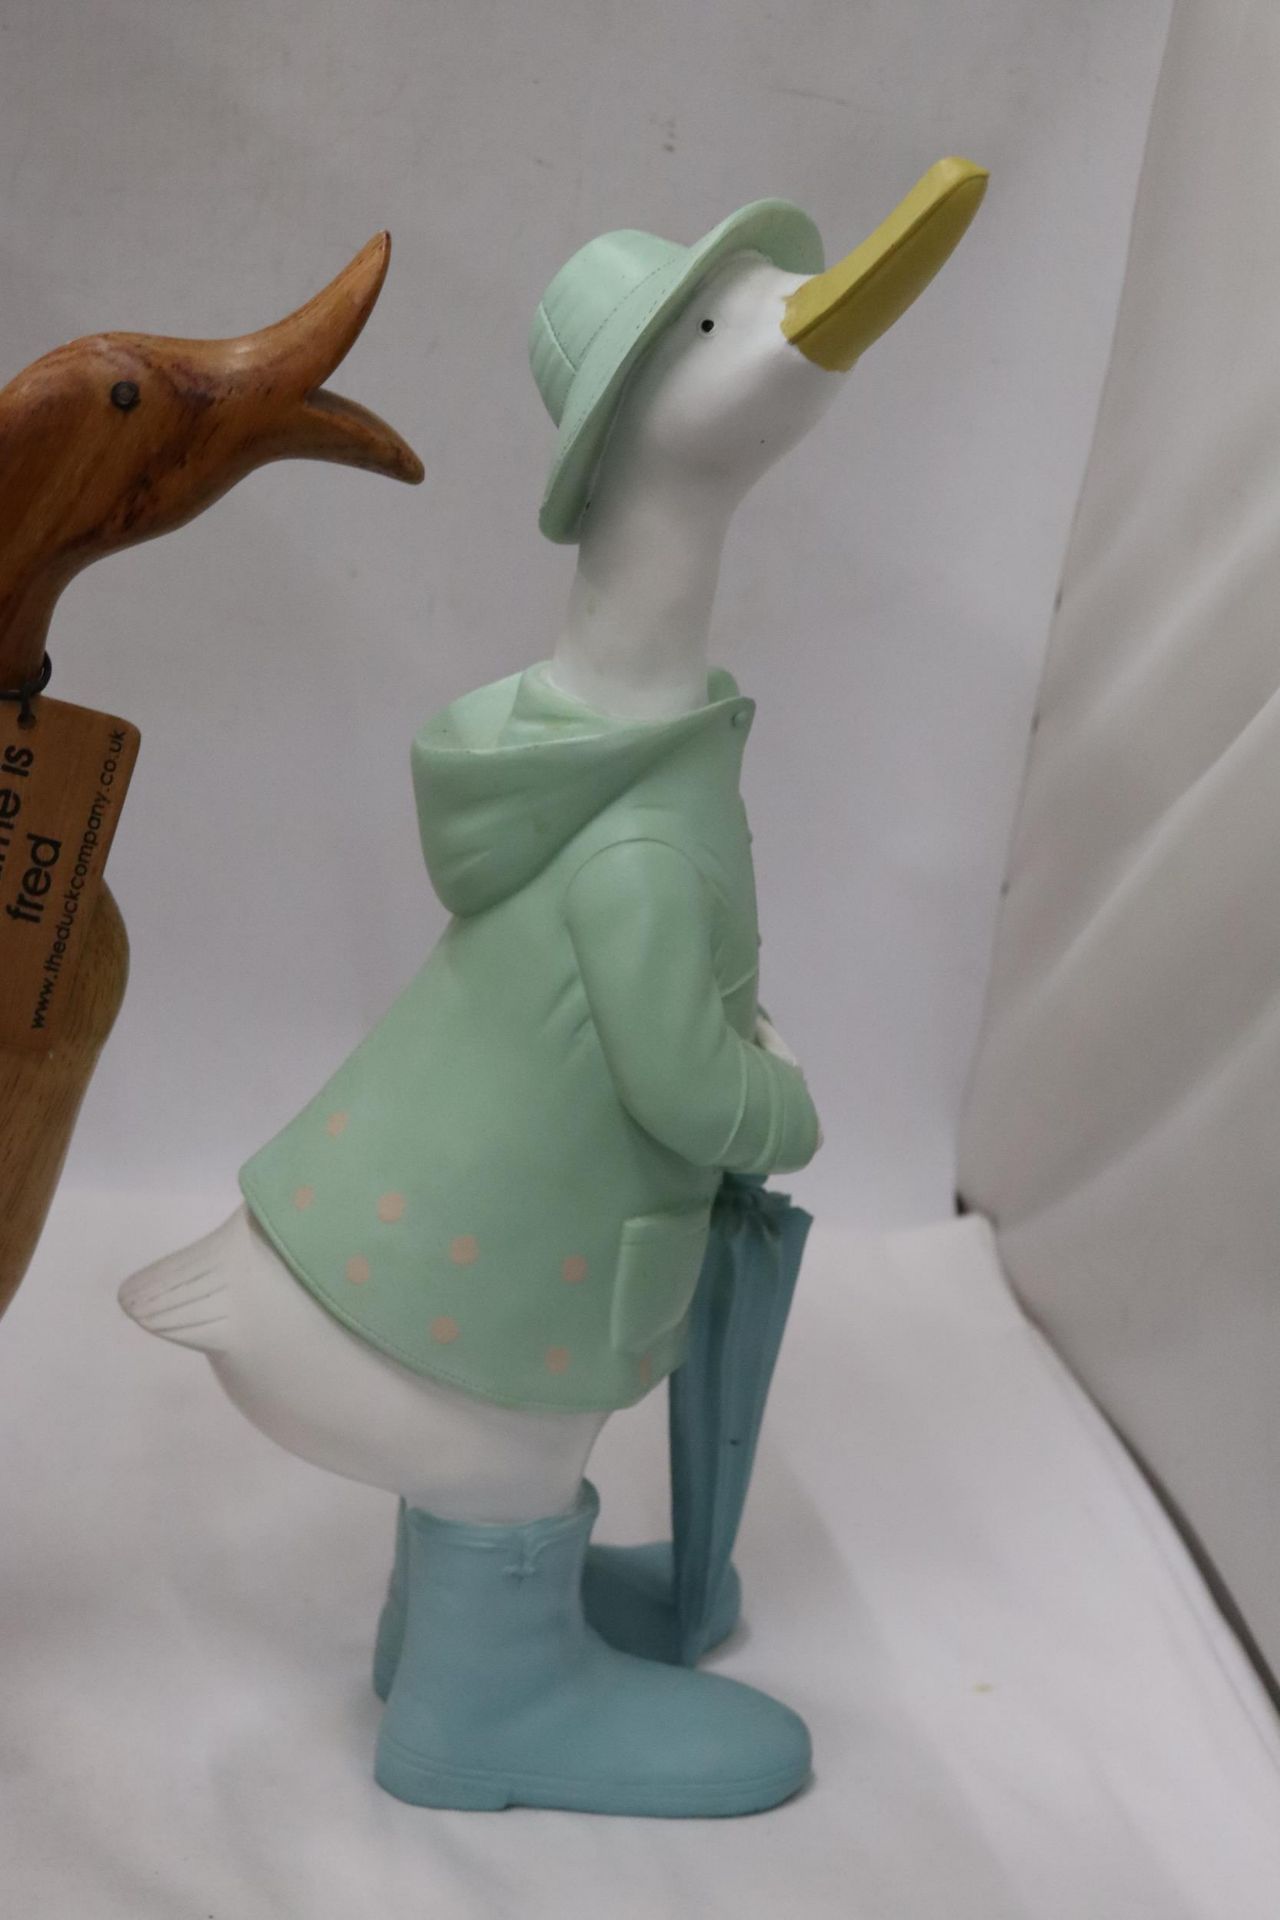 A WOODEN DUCK FROM 'THE DUCK COMPANY' CALLED FRED PLUS A PAINTED DUCK, HEIGHTS 42CM - Image 4 of 7